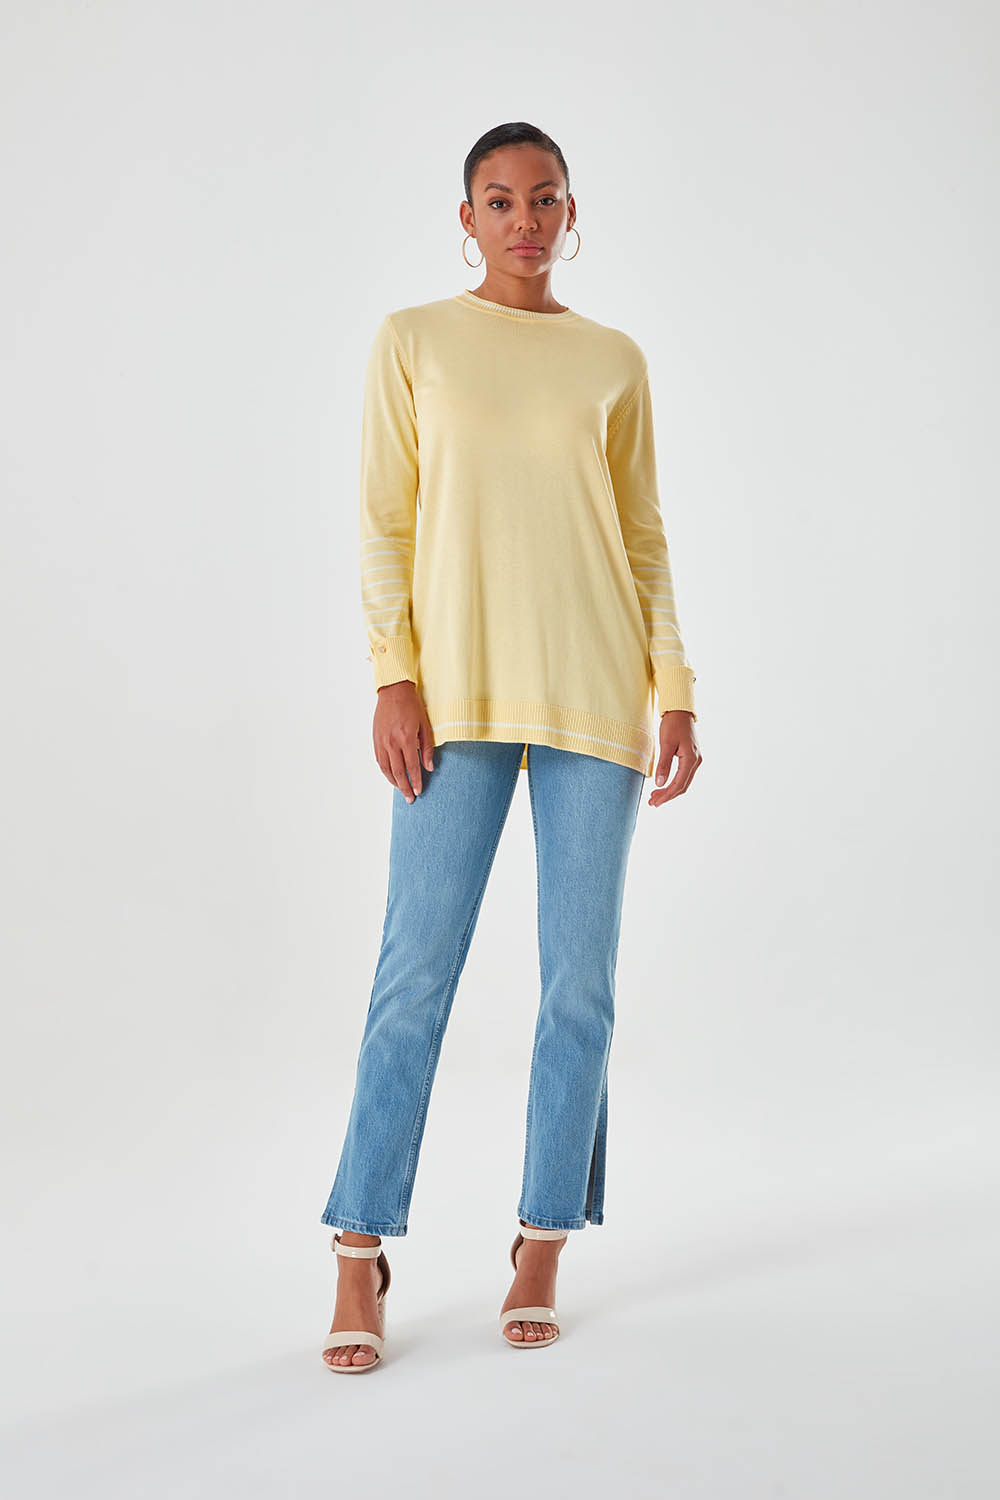 Yellow Knitwear Tunic with Stripe Sleeves Patterned